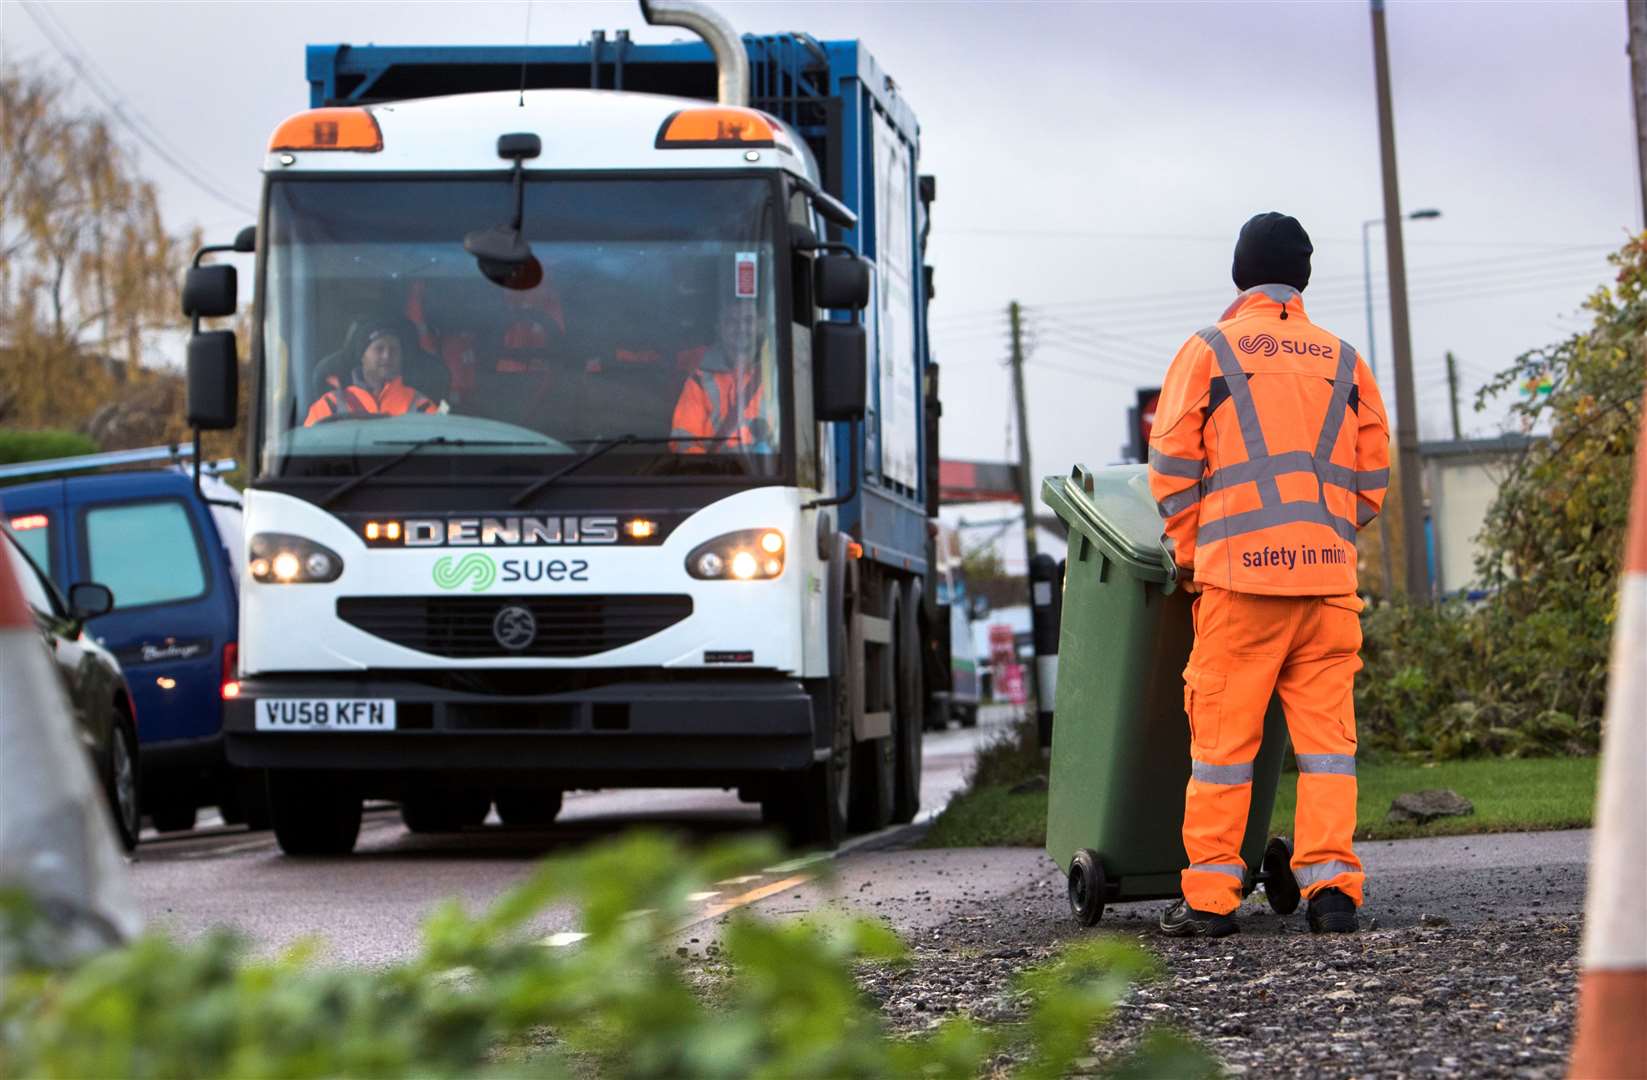 SUEZ Recycling & Recovery UK Ltd began collecting waste across Swale in March